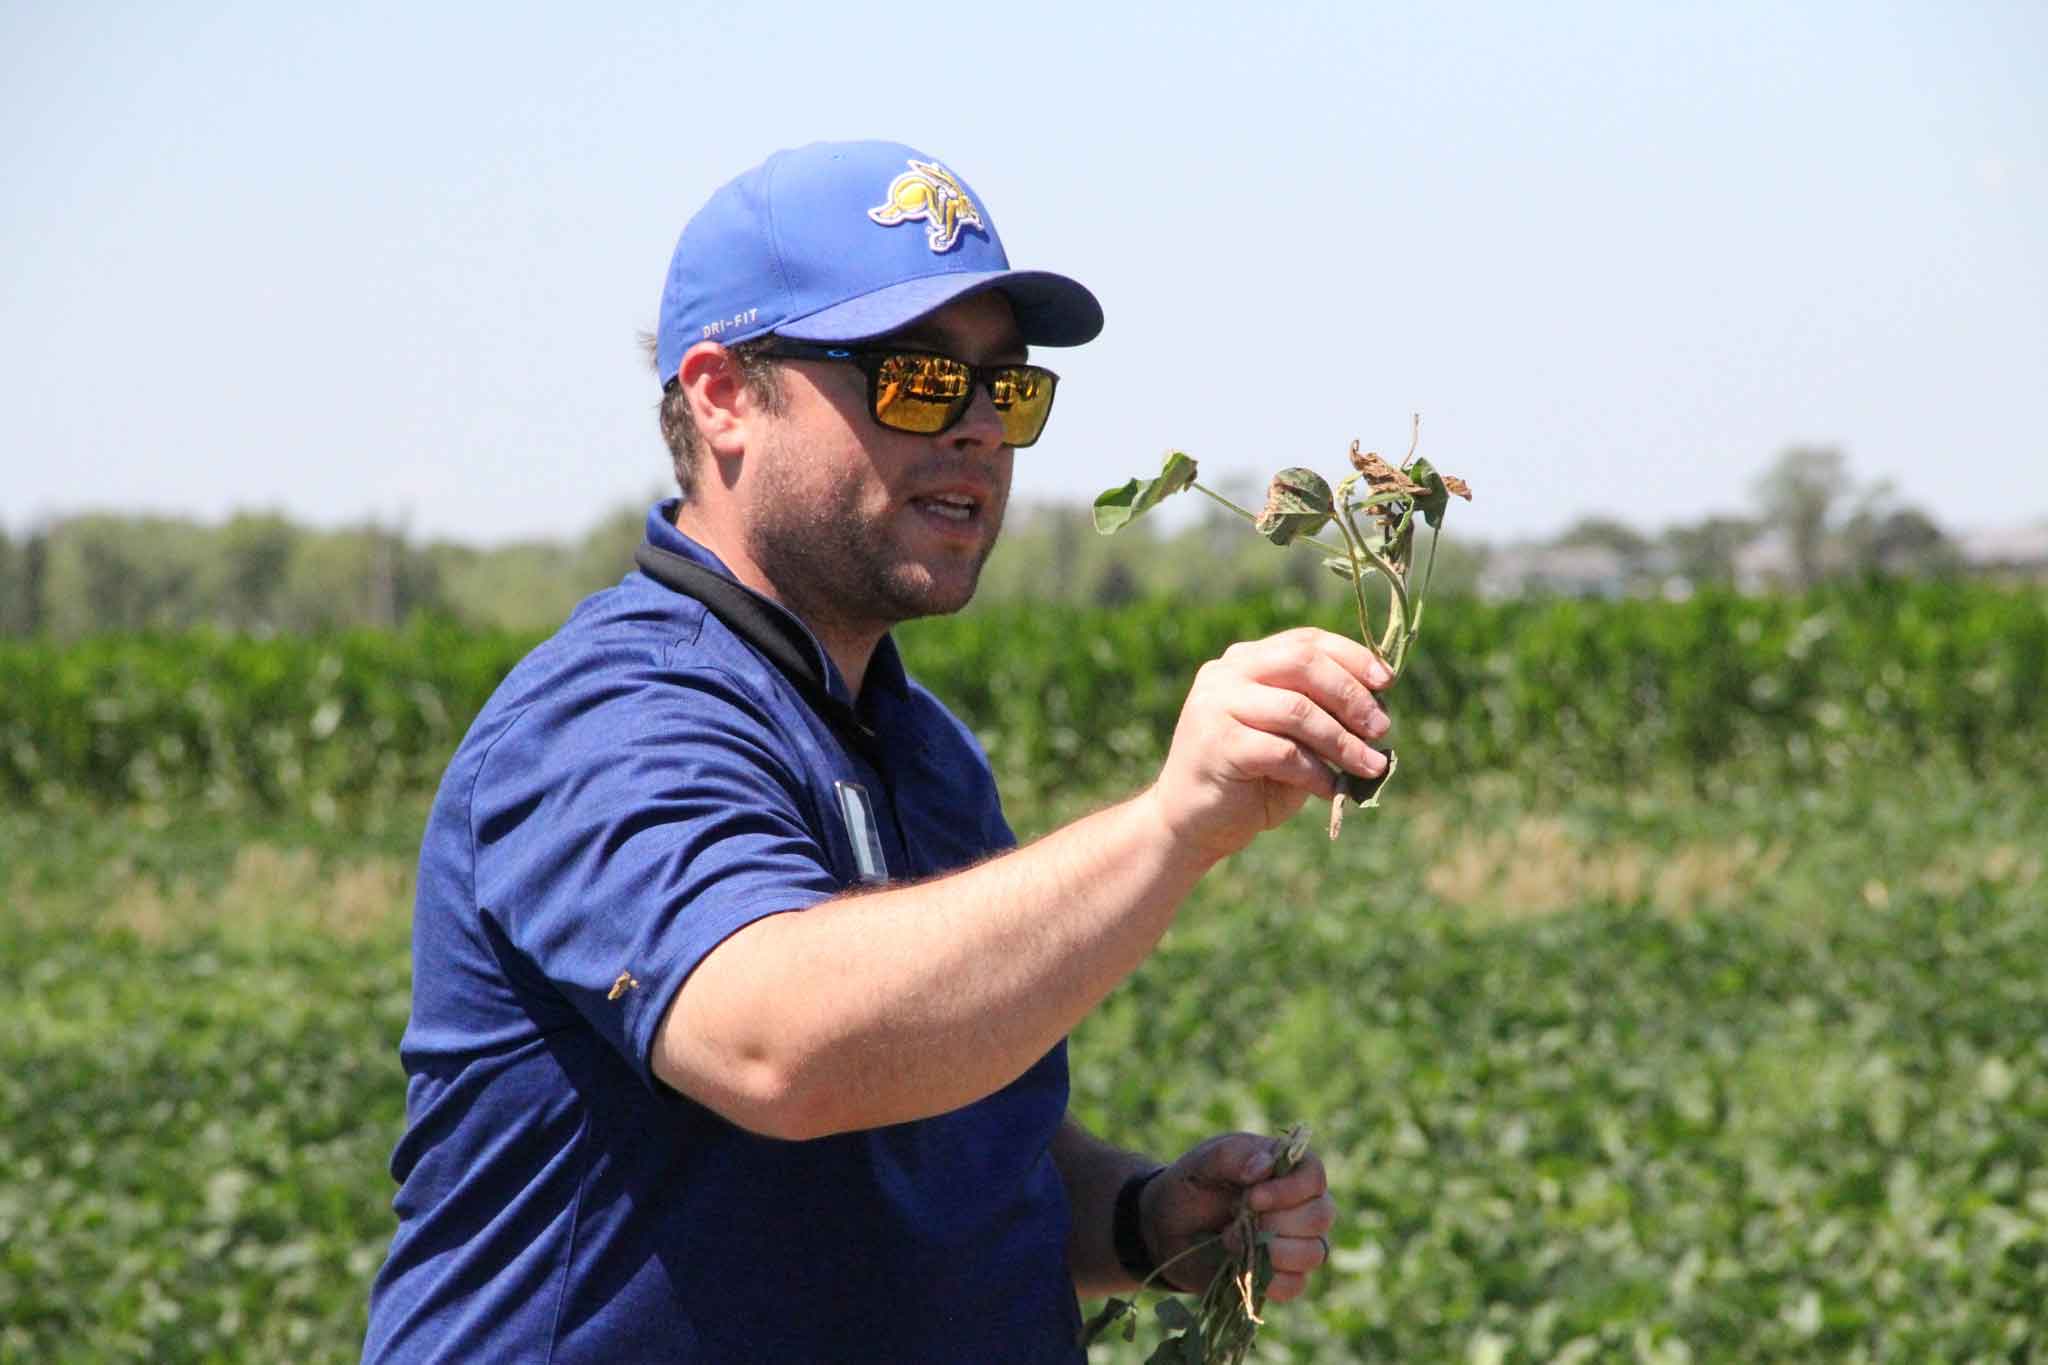 Adam Varenhorst holds up a plant during Southeast Research Farm Field Day. He's wearing a blue shirt, baseball cap and sunglasses and is standing in a green field